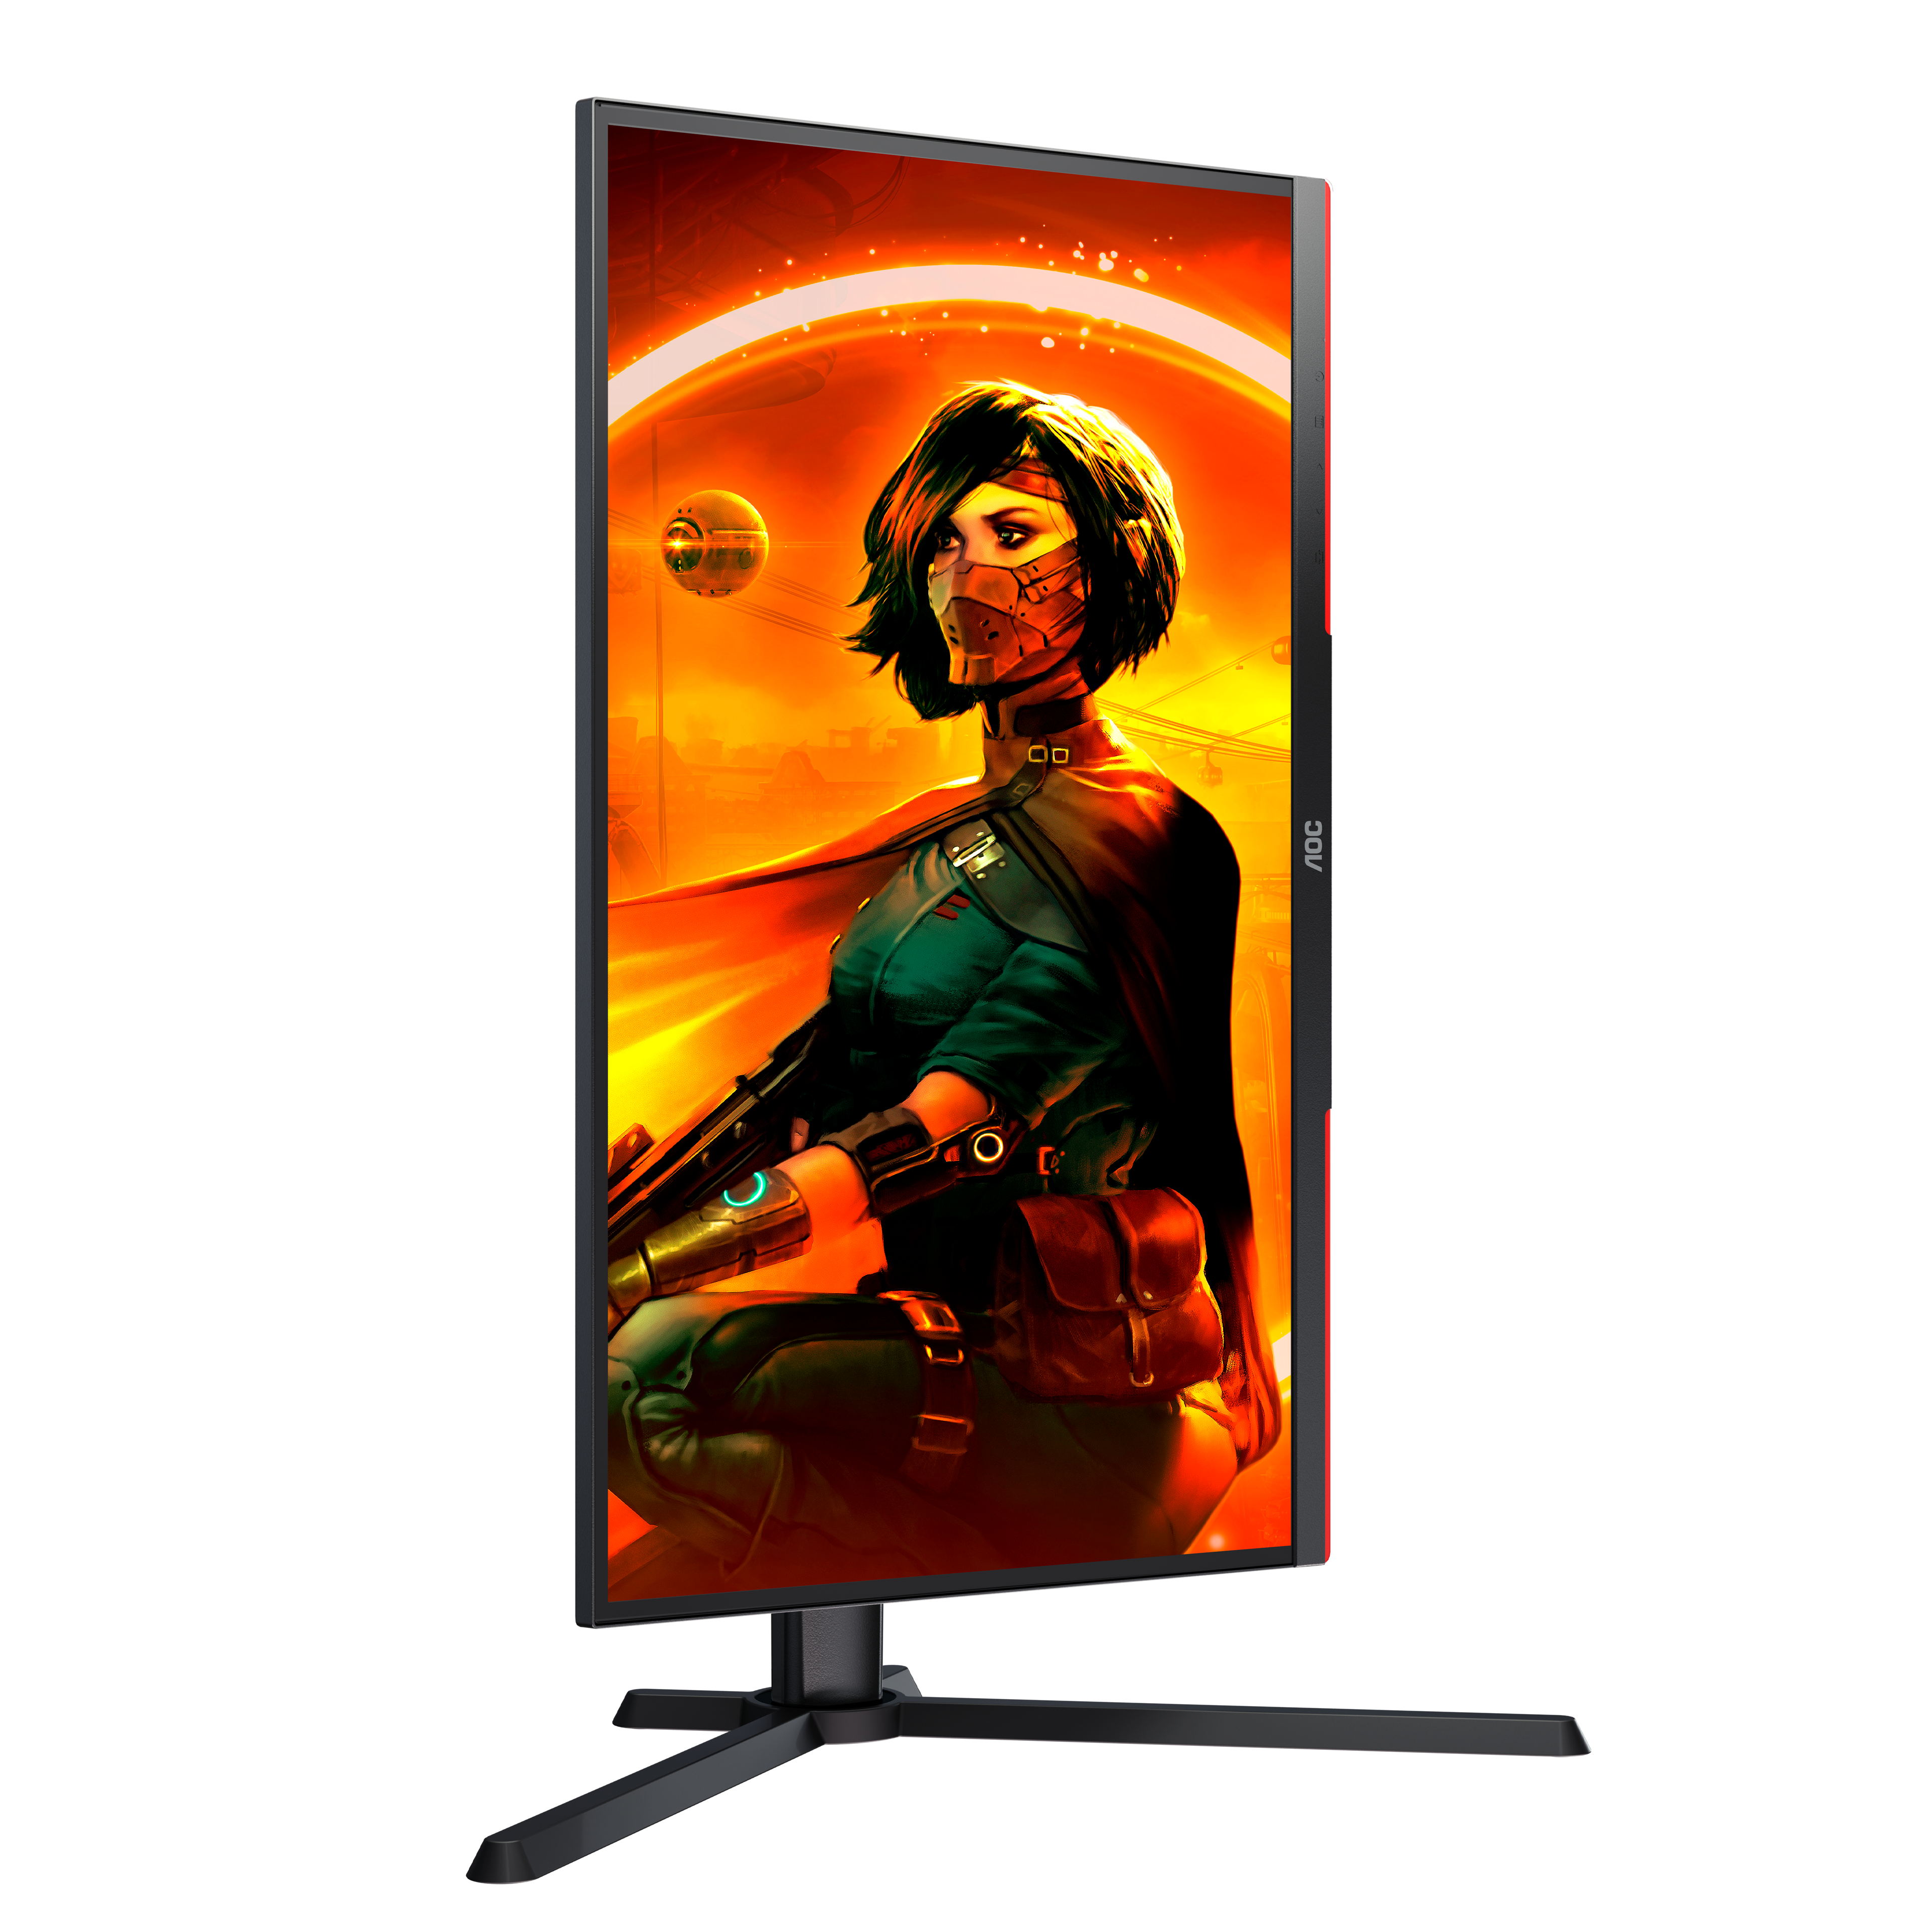 AOC Gaming 25G3ZM/BK monitor with 240Hz refresh rate, 1ms GtG response time  launched - Gizmochina